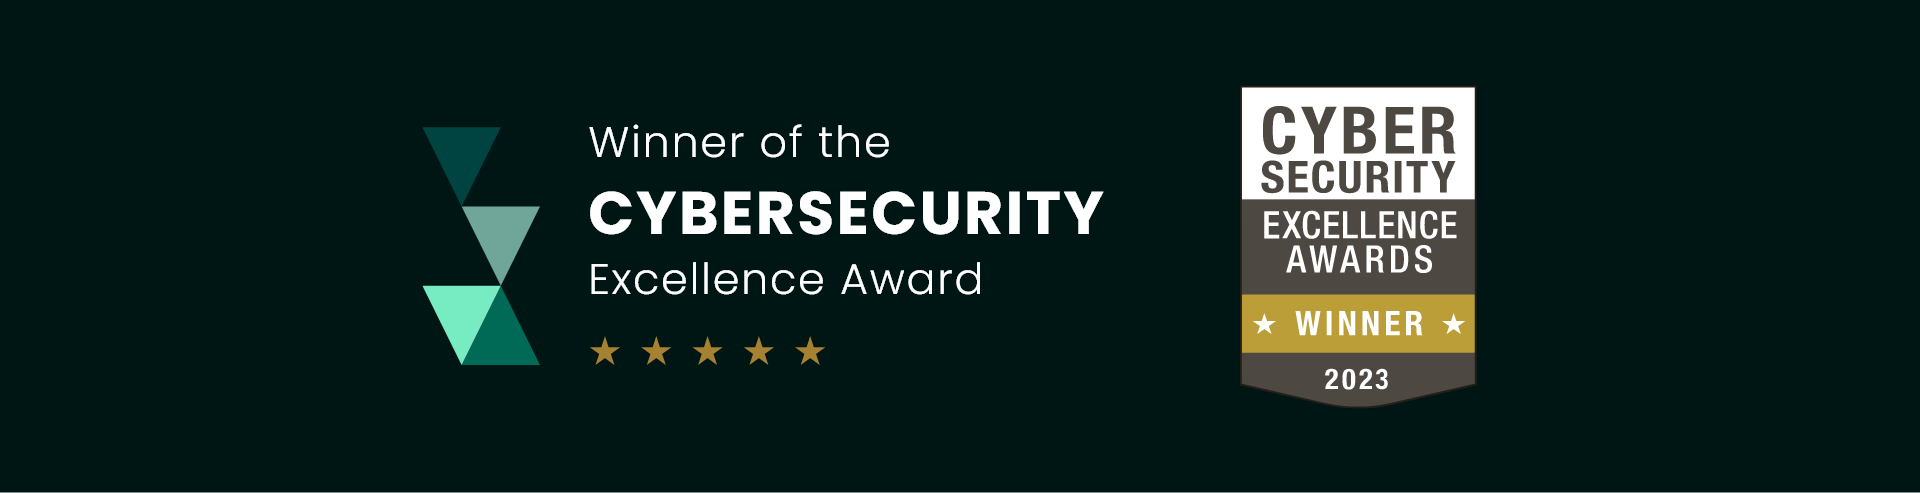 Cybersecurity Excellence Award